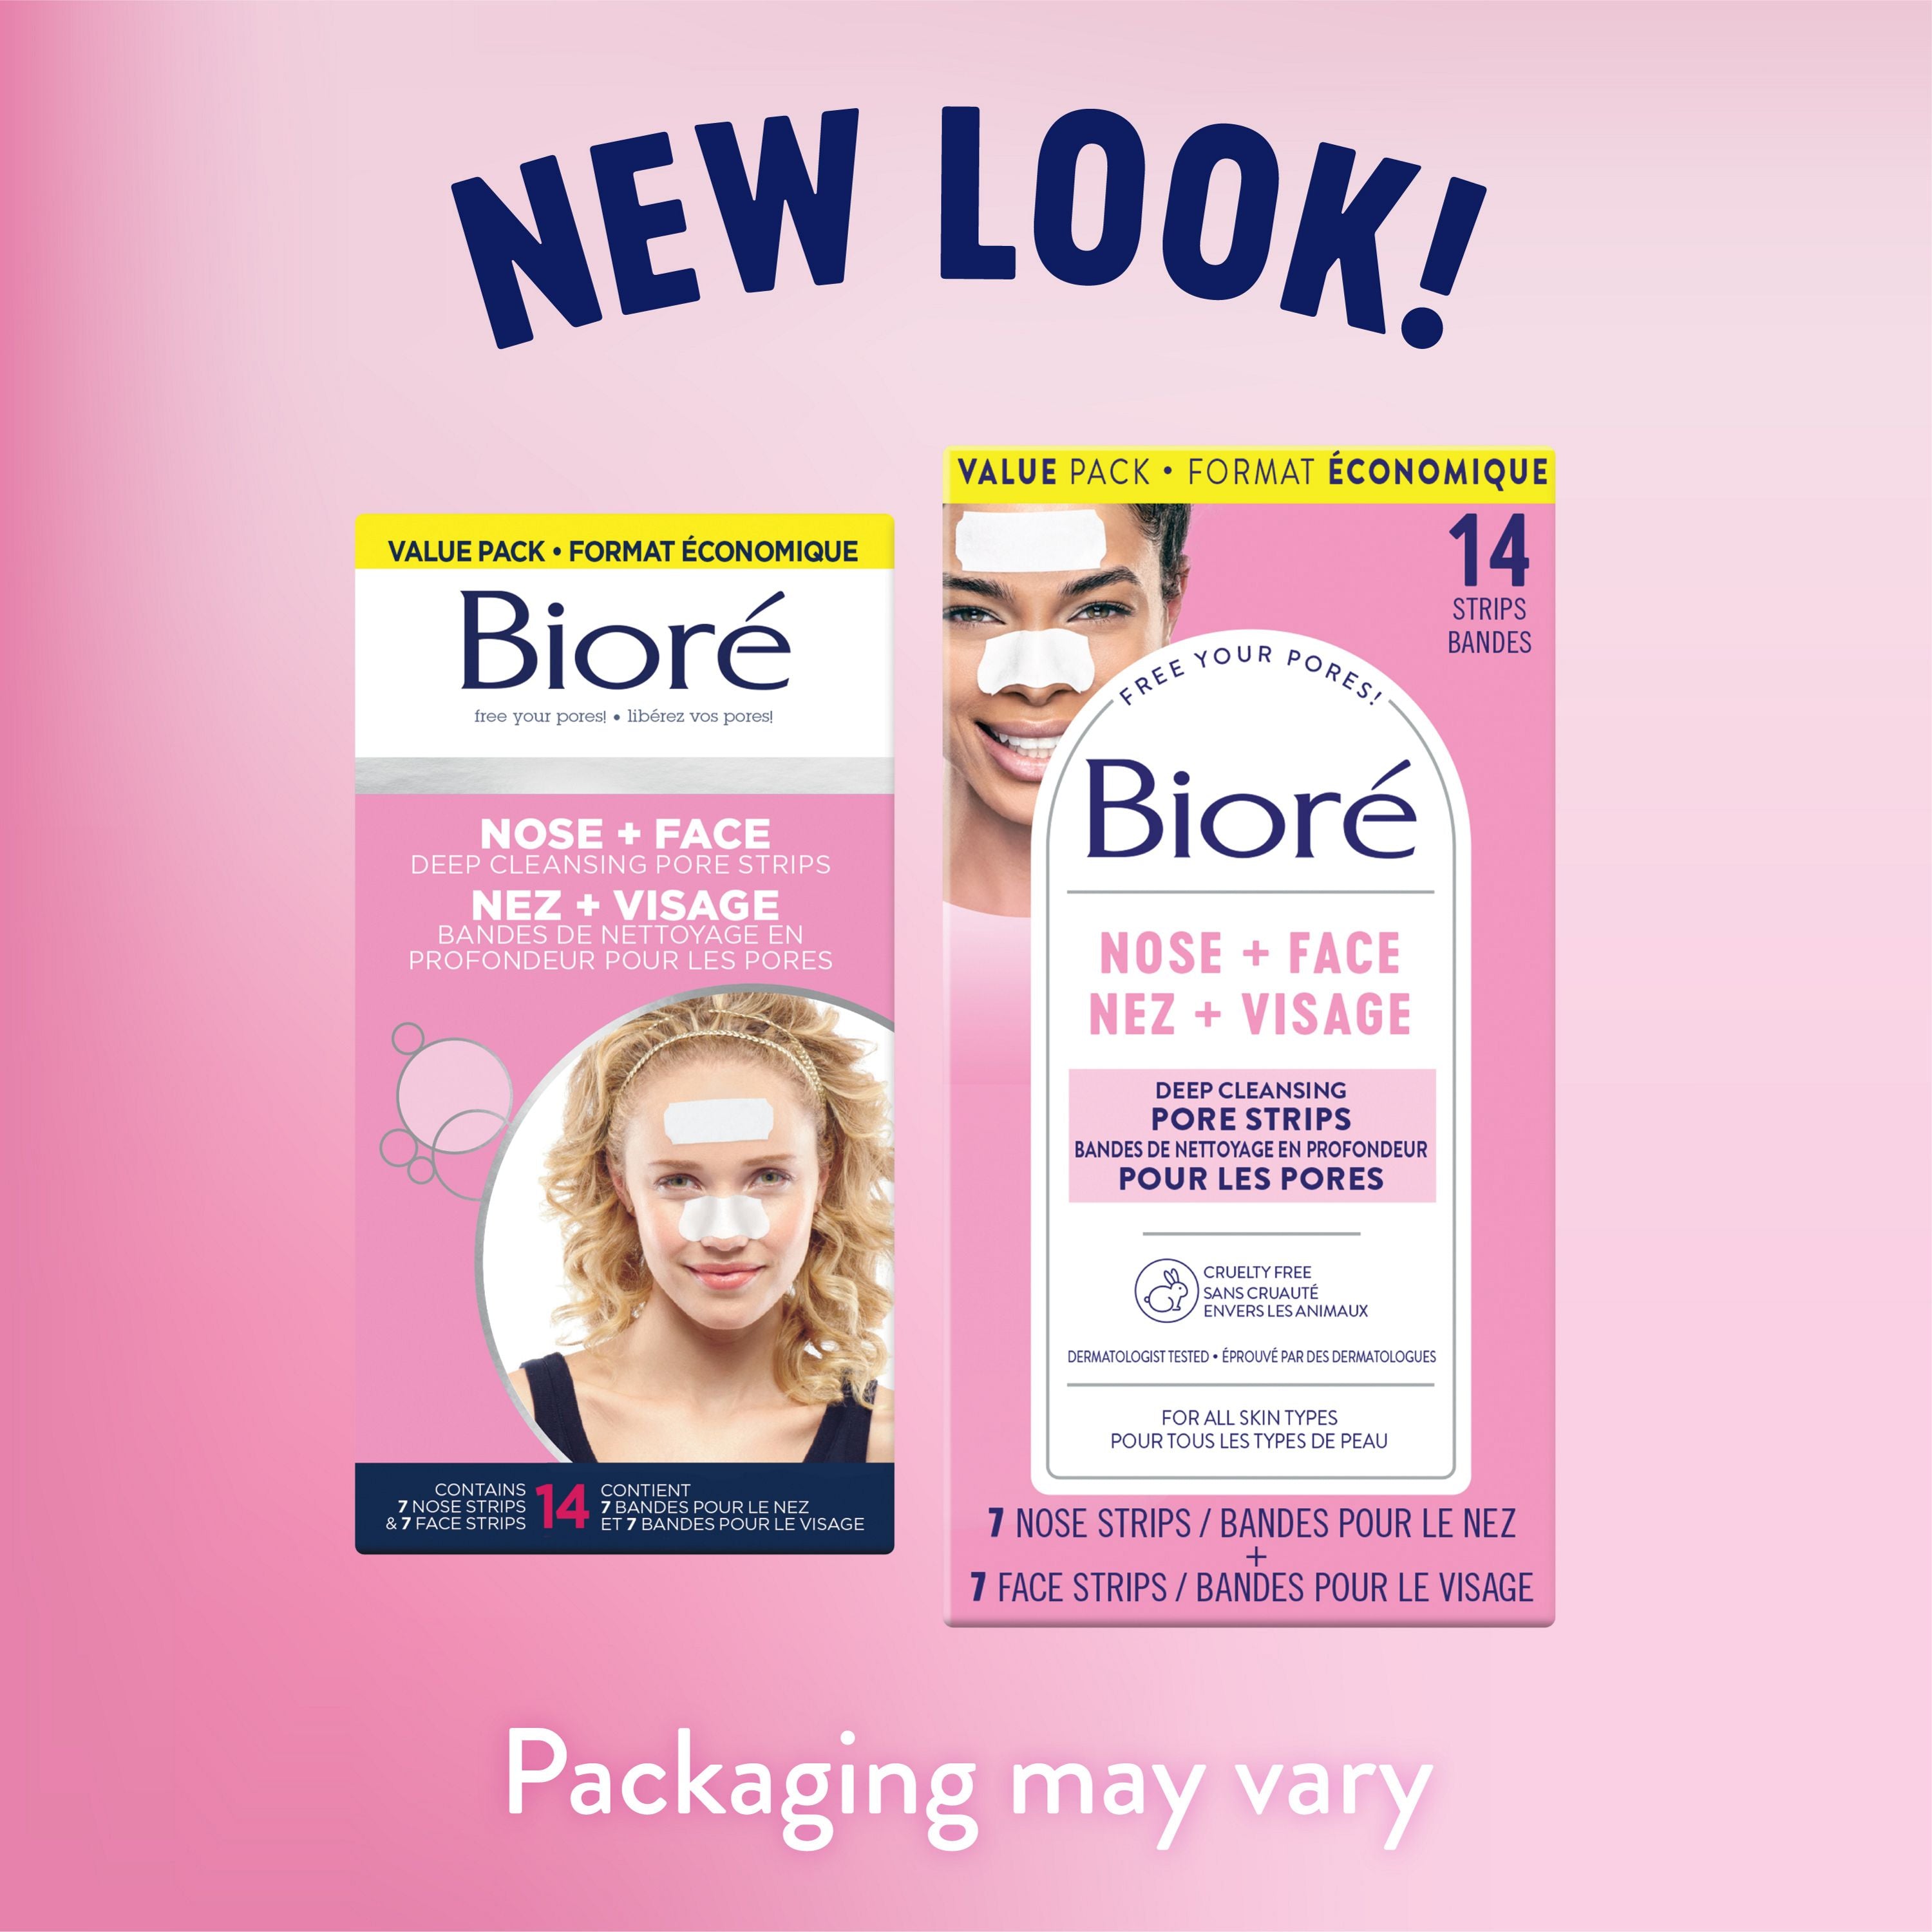 English: New look! Packaging may vary Français: Nouveau look! L’emballage peut varier